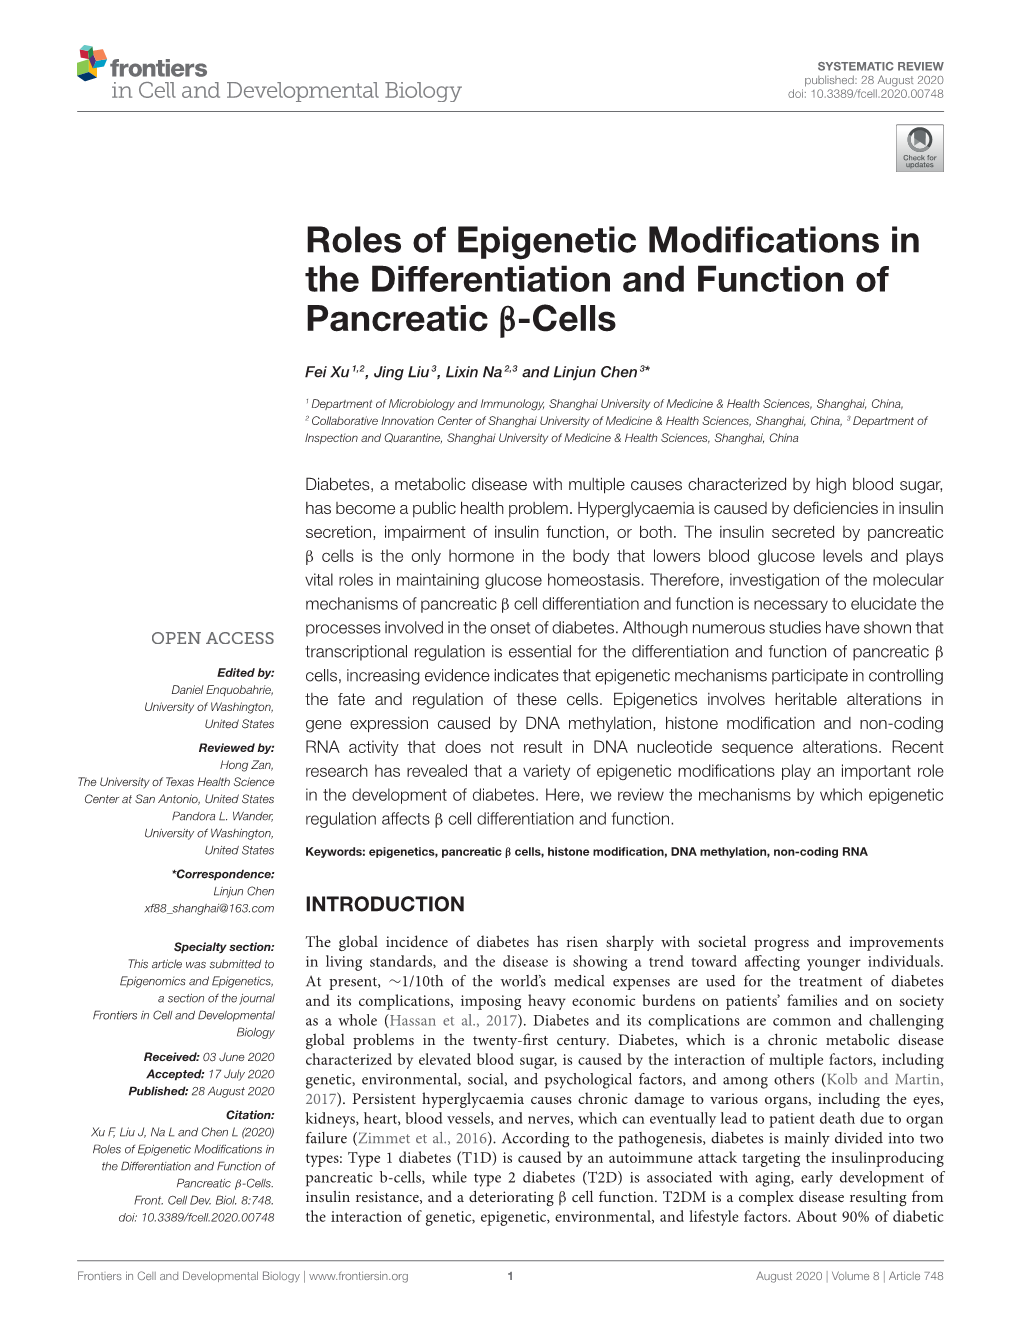 Roles of Epigenetic Modifications in the Differentiation and Function Of